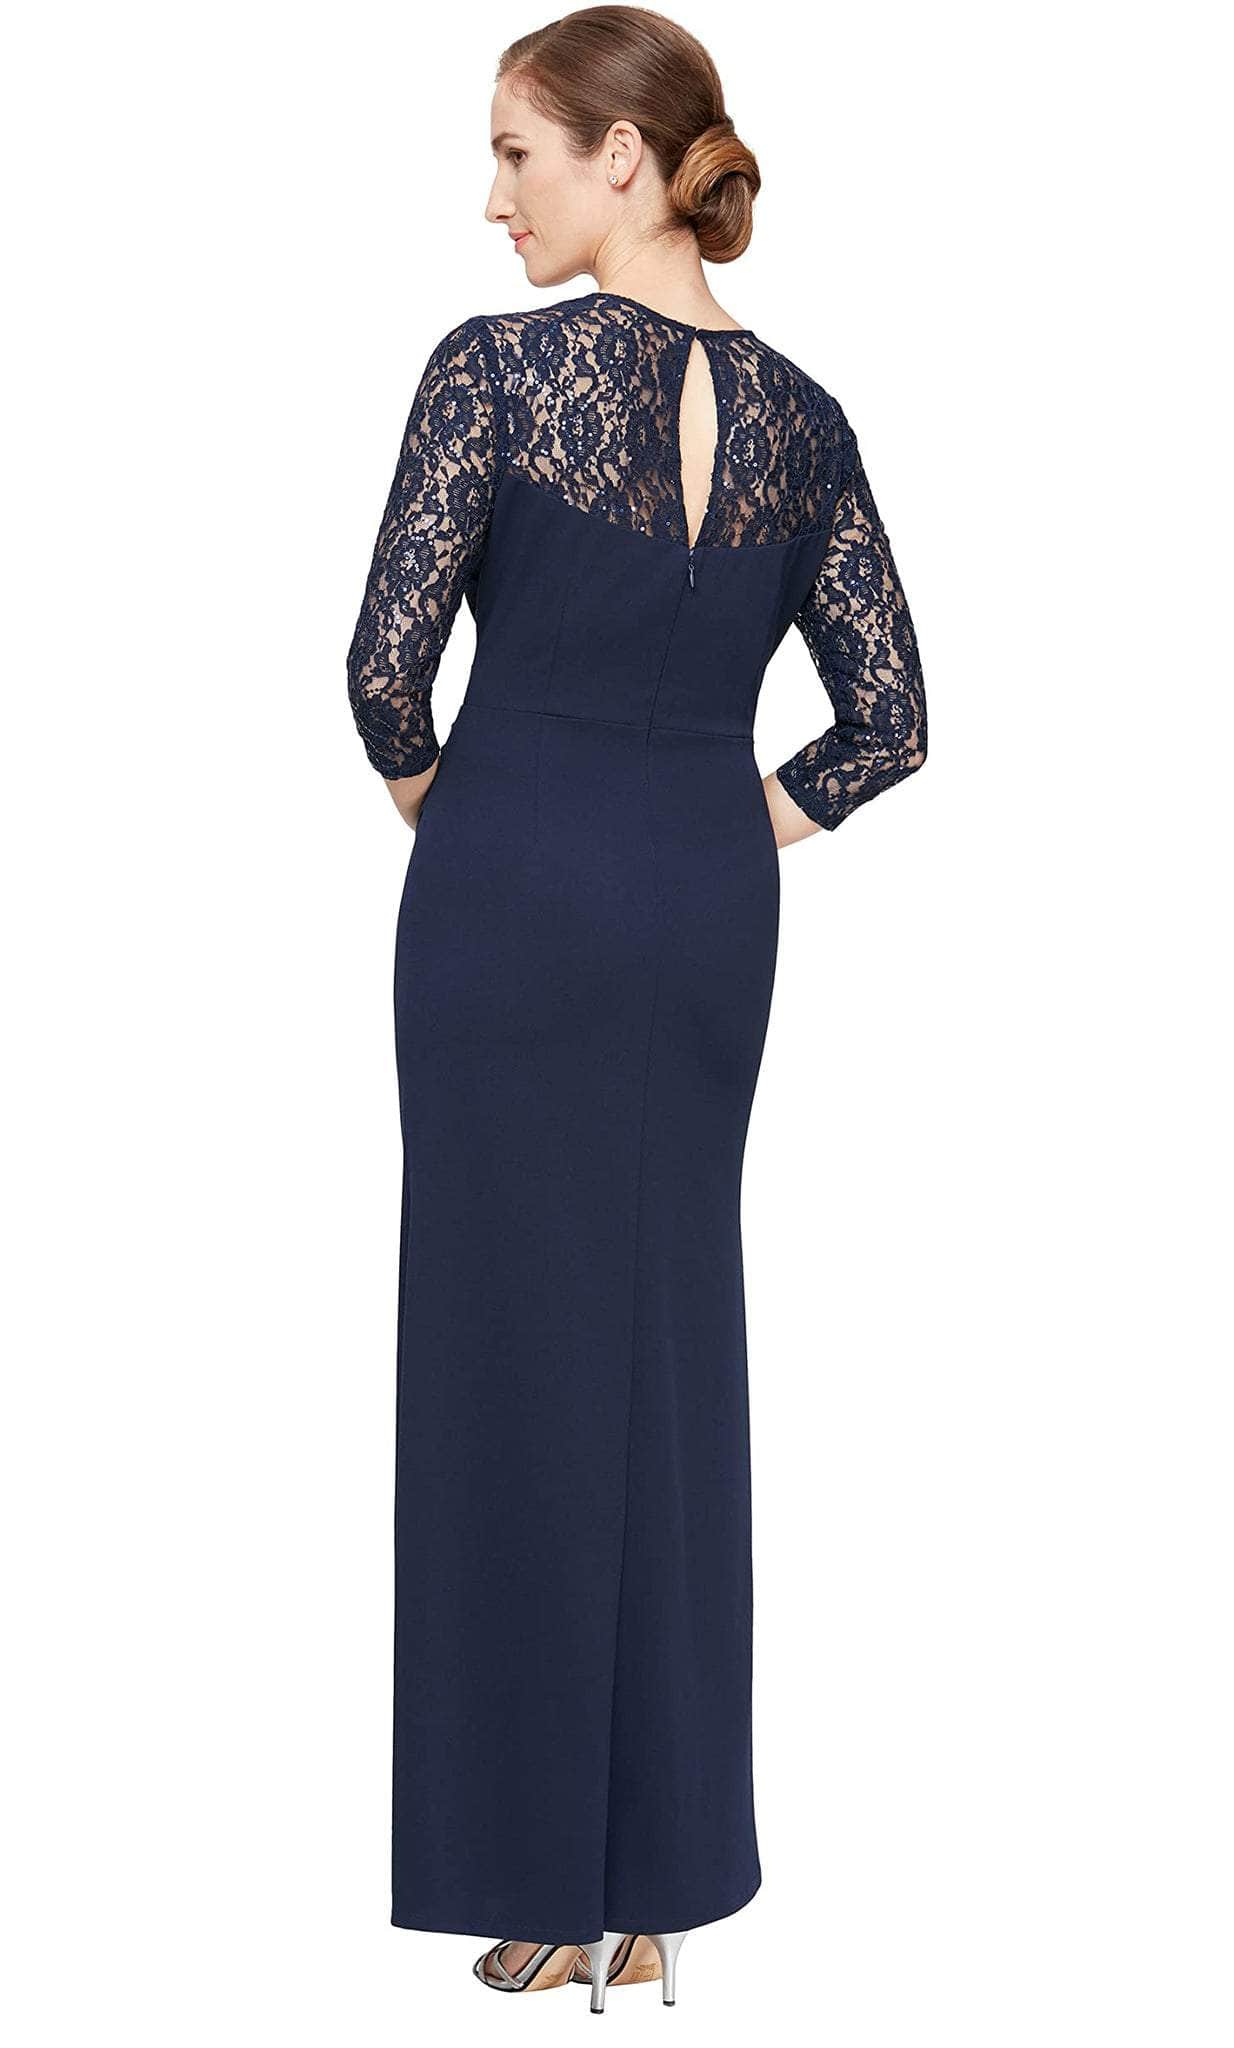 SLNY 9137210 - Square Neck Lace Formal Dress Mother of the Bride Dresses